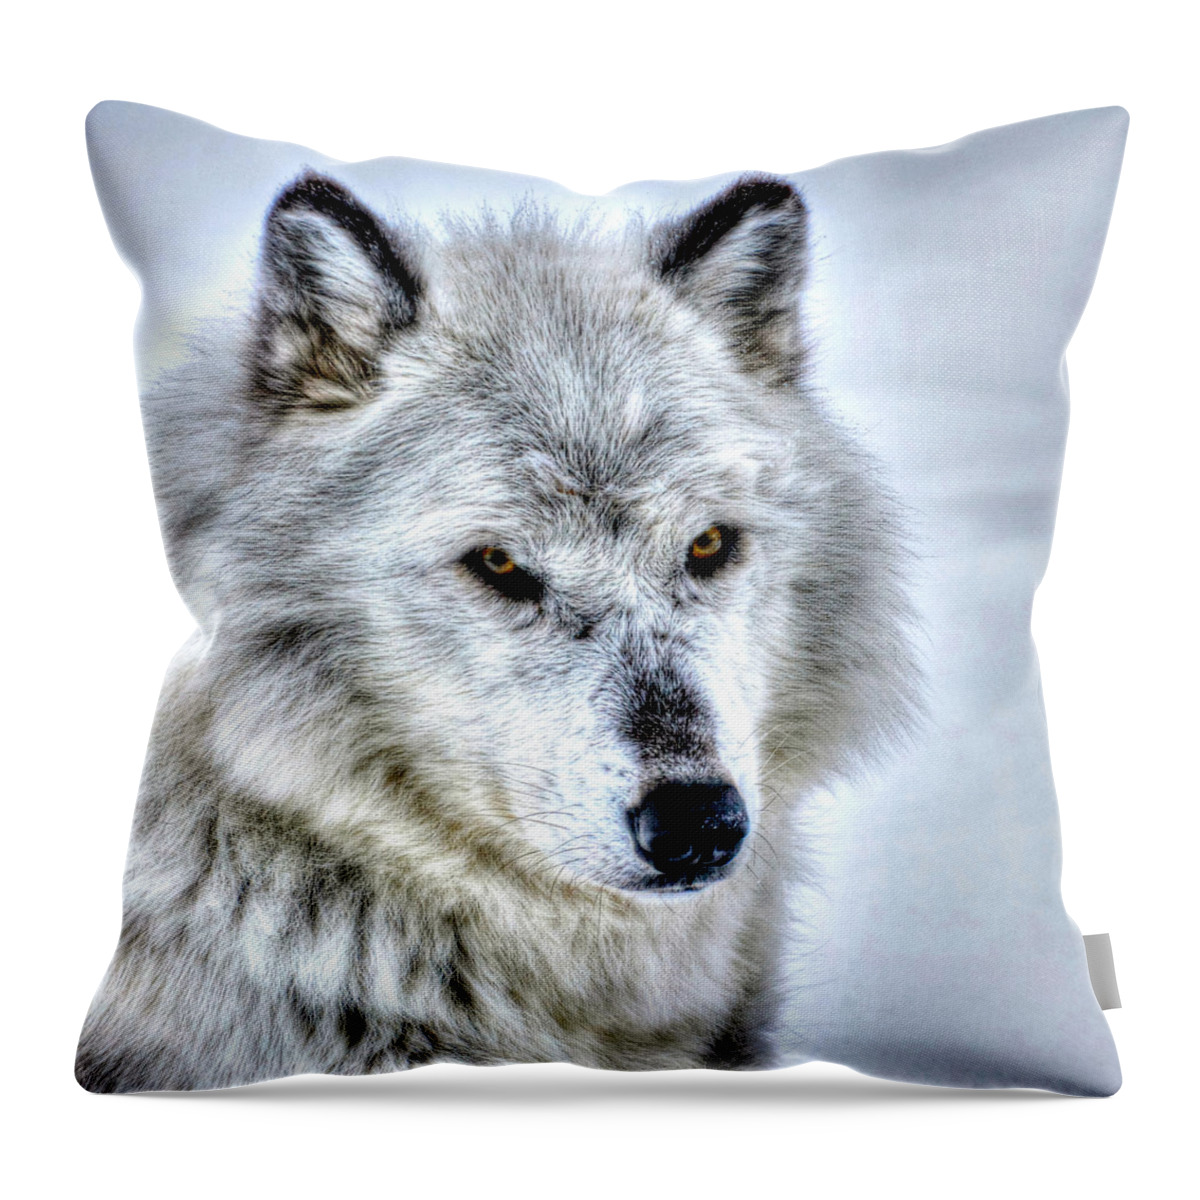 Wolf Throw Pillow featuring the photograph Looking Pretty by Don Mercer